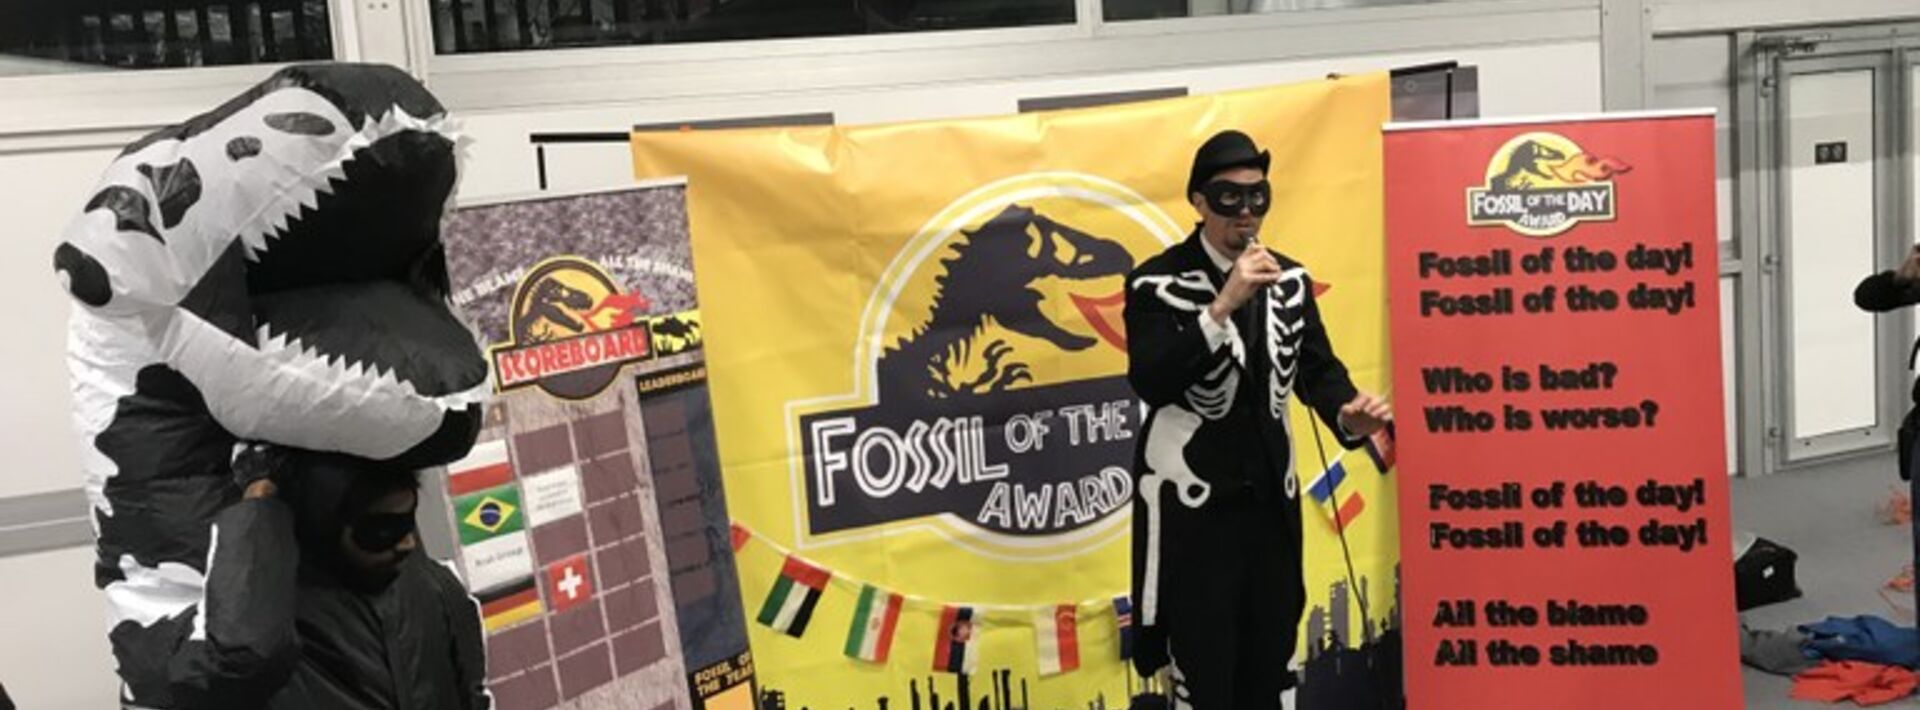 Brazil receives the unwelcome 'Fossil of the Day' award at COP24 in Poland